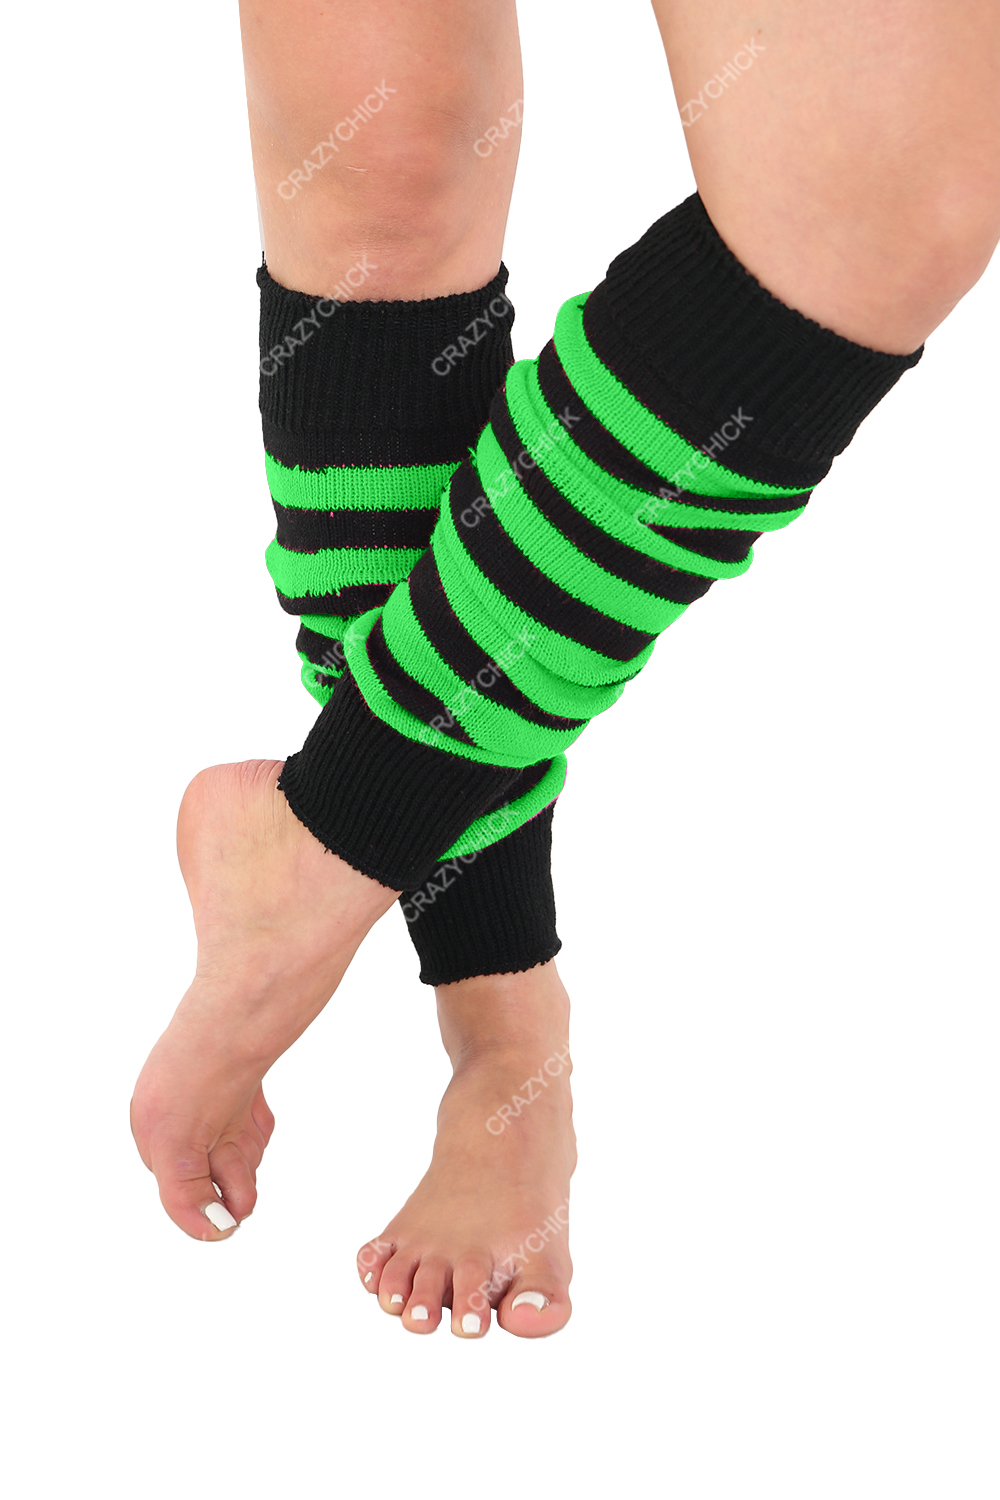 Crazy Chick Black and Green Stripe Legwarmers (Pack of 12)